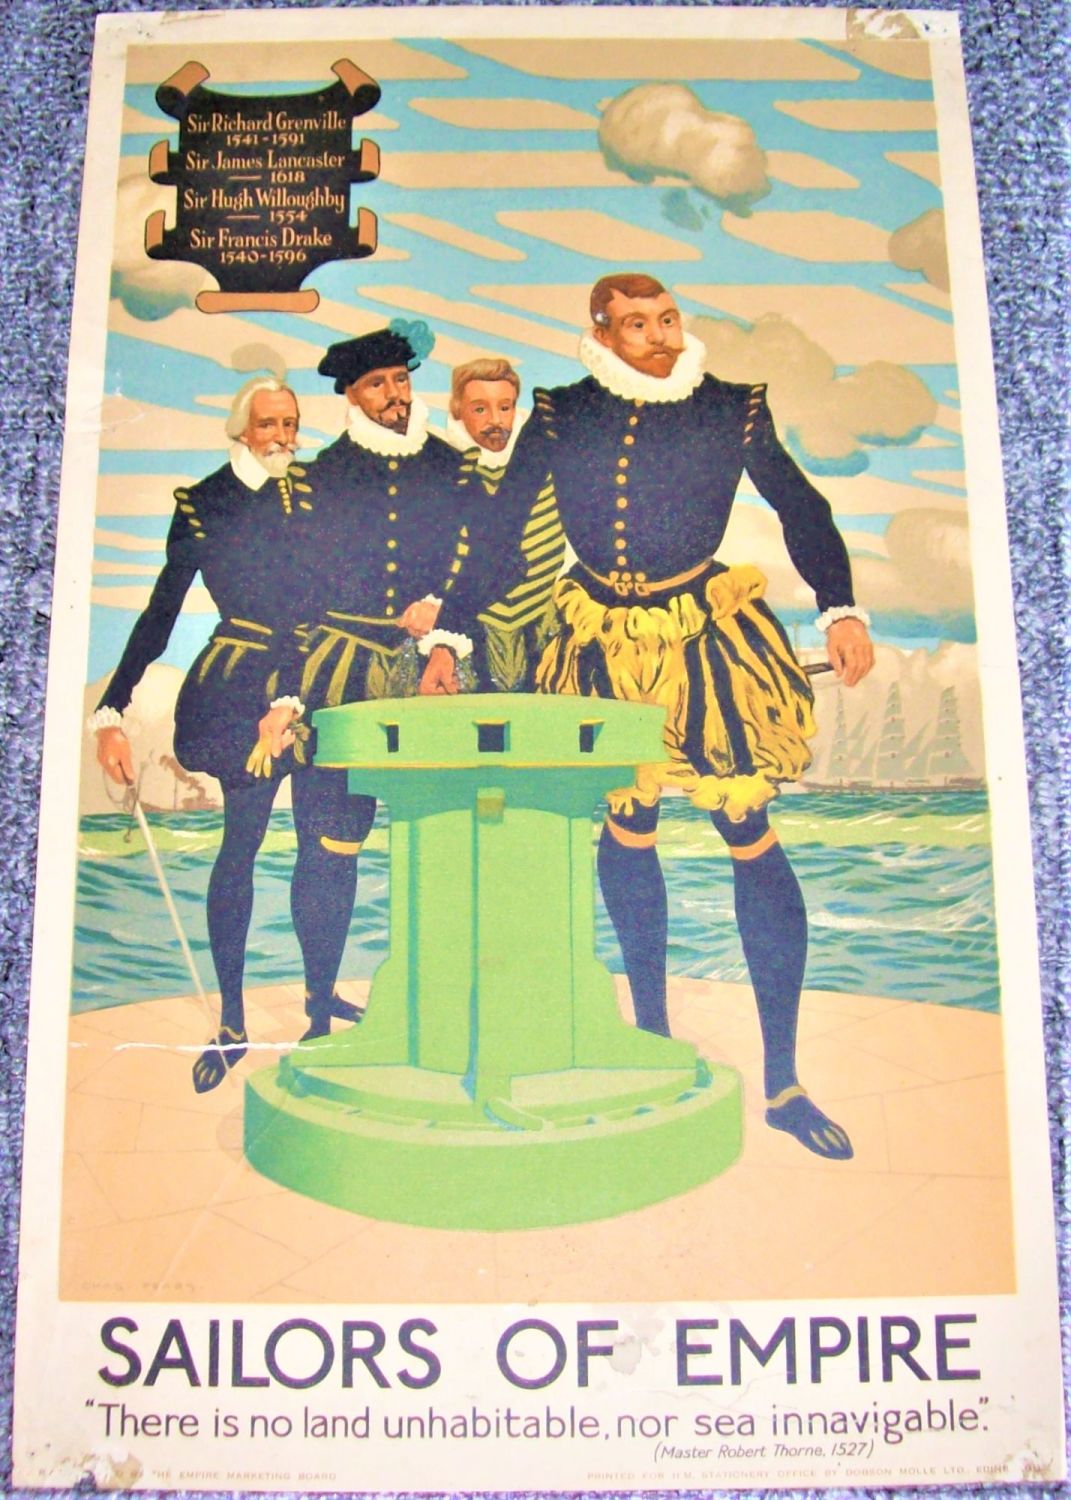 BRITISH EMPIRE POSTER 'SAILORS OF THE EMPIRE' WILLOUGHBY DRAKE GRENVILLE 19